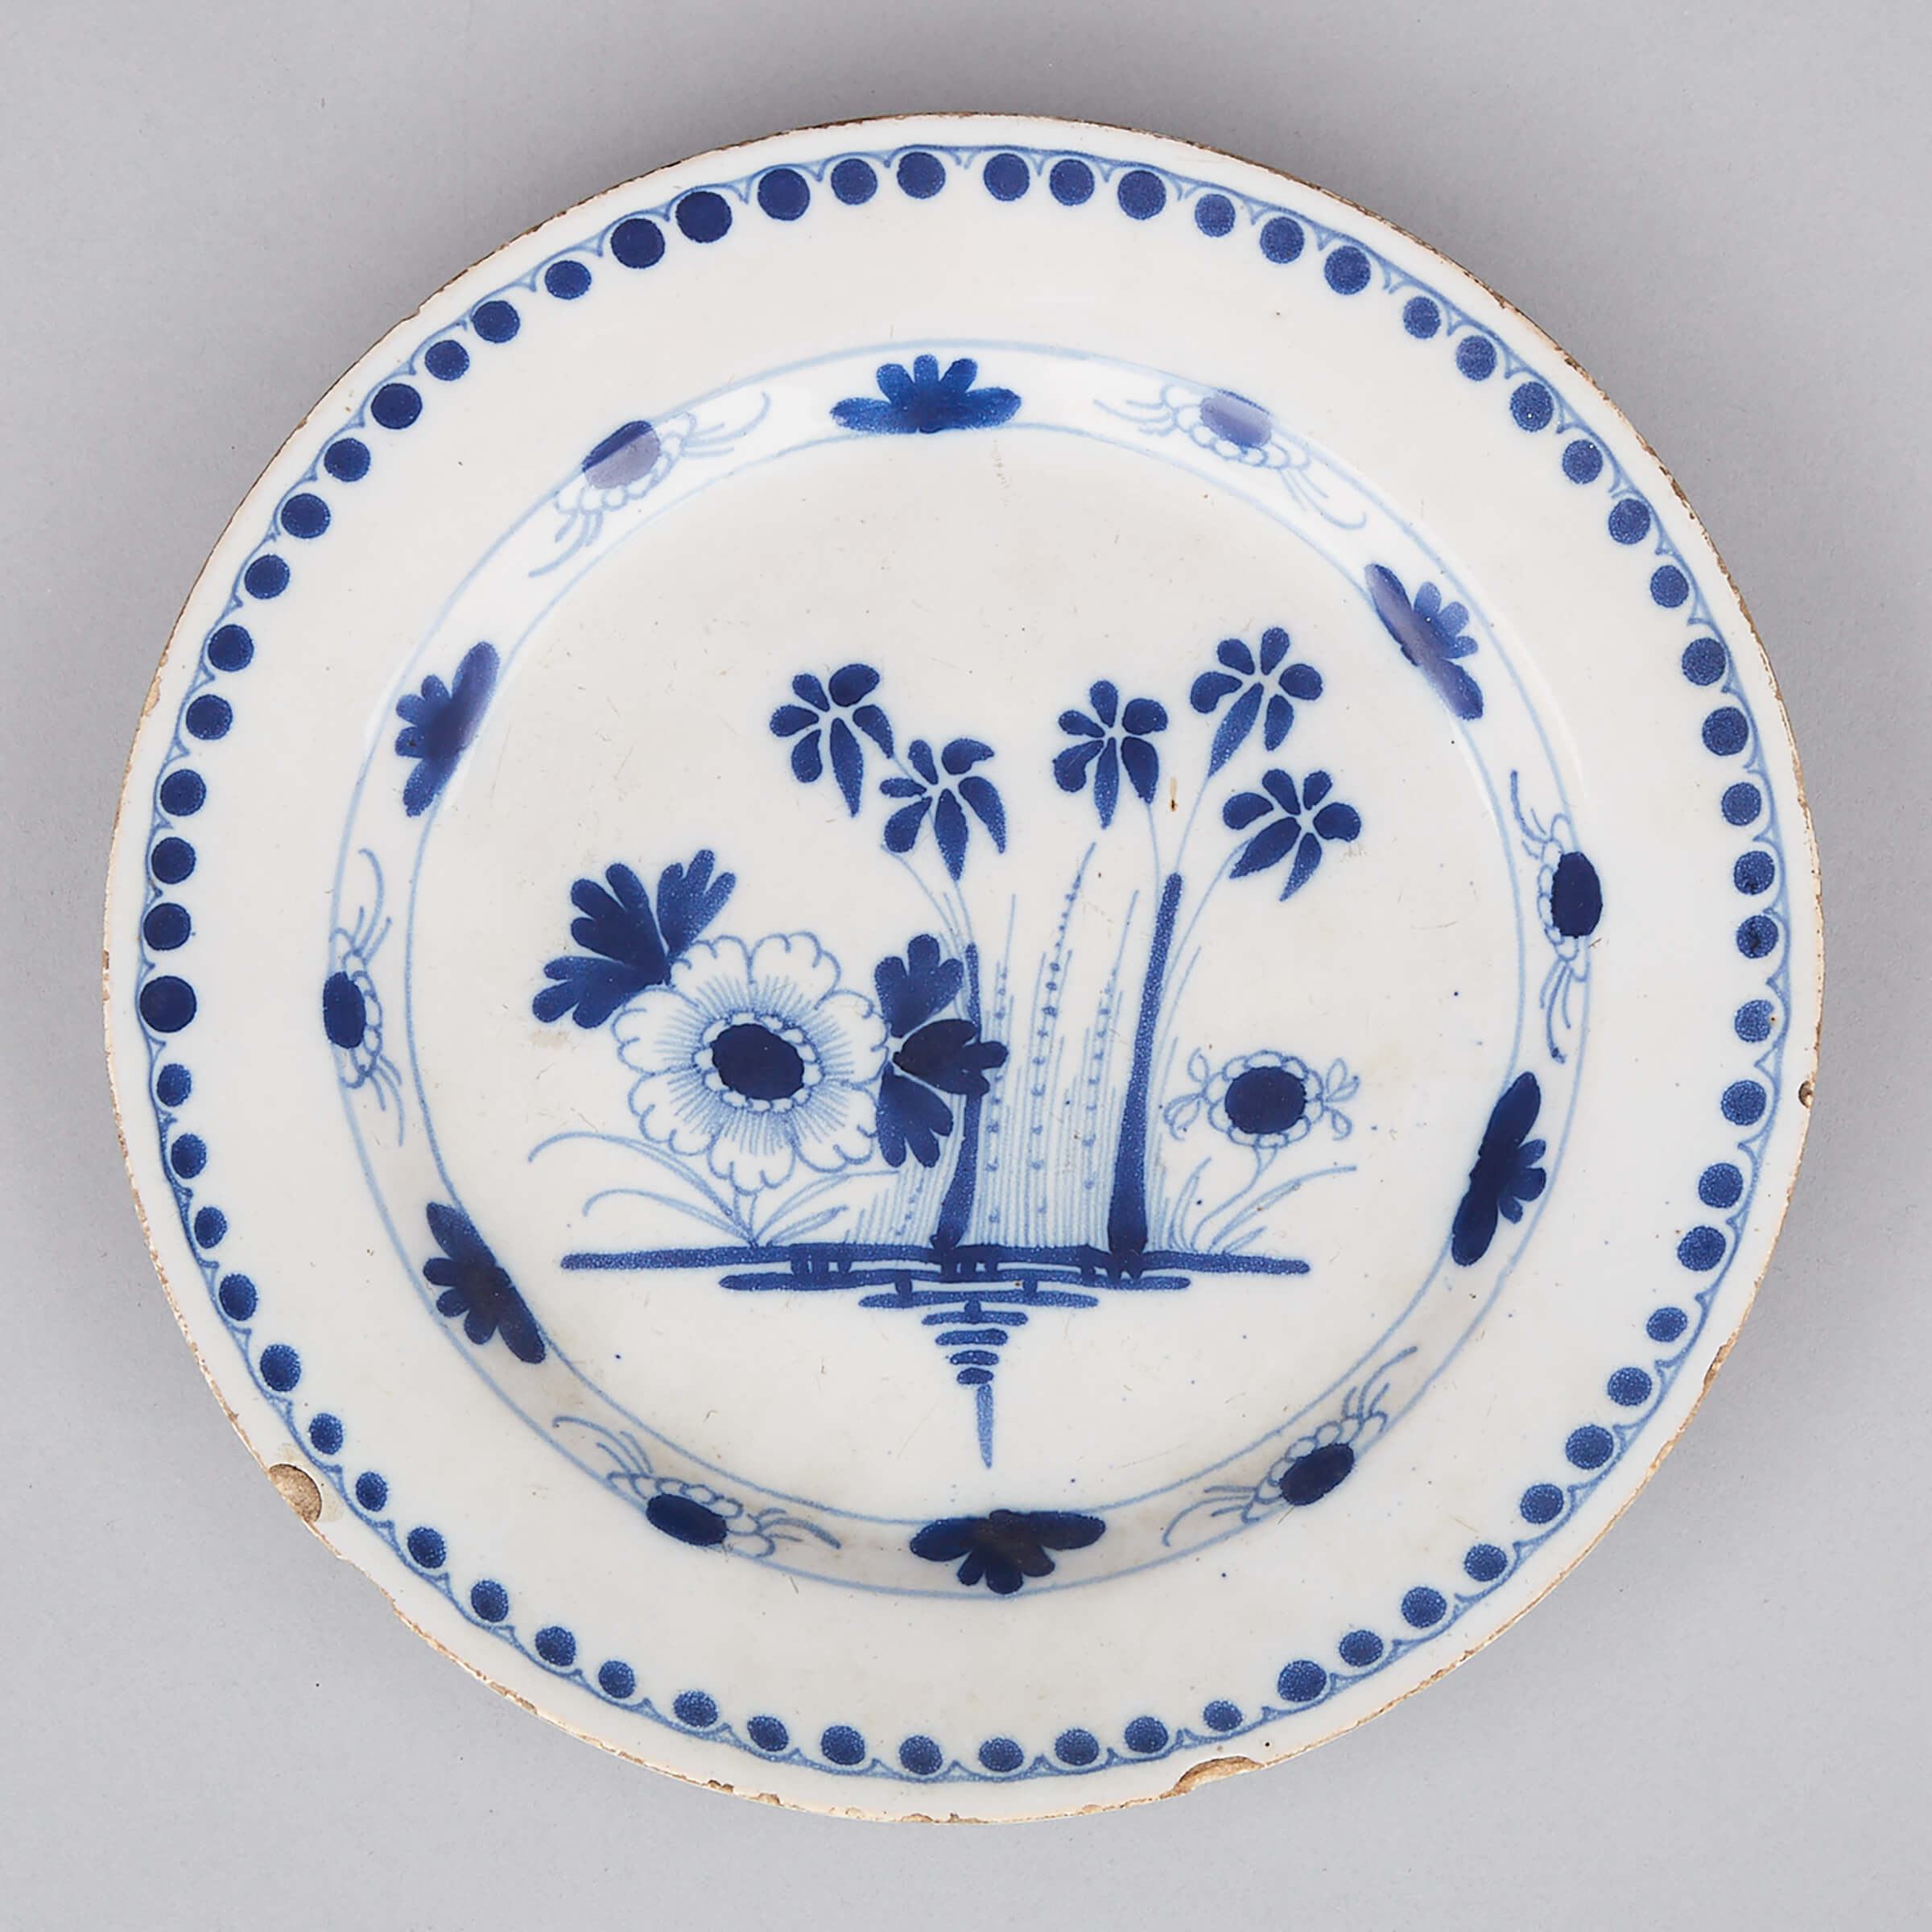 London Delft Blue and White Plate, c. 1770